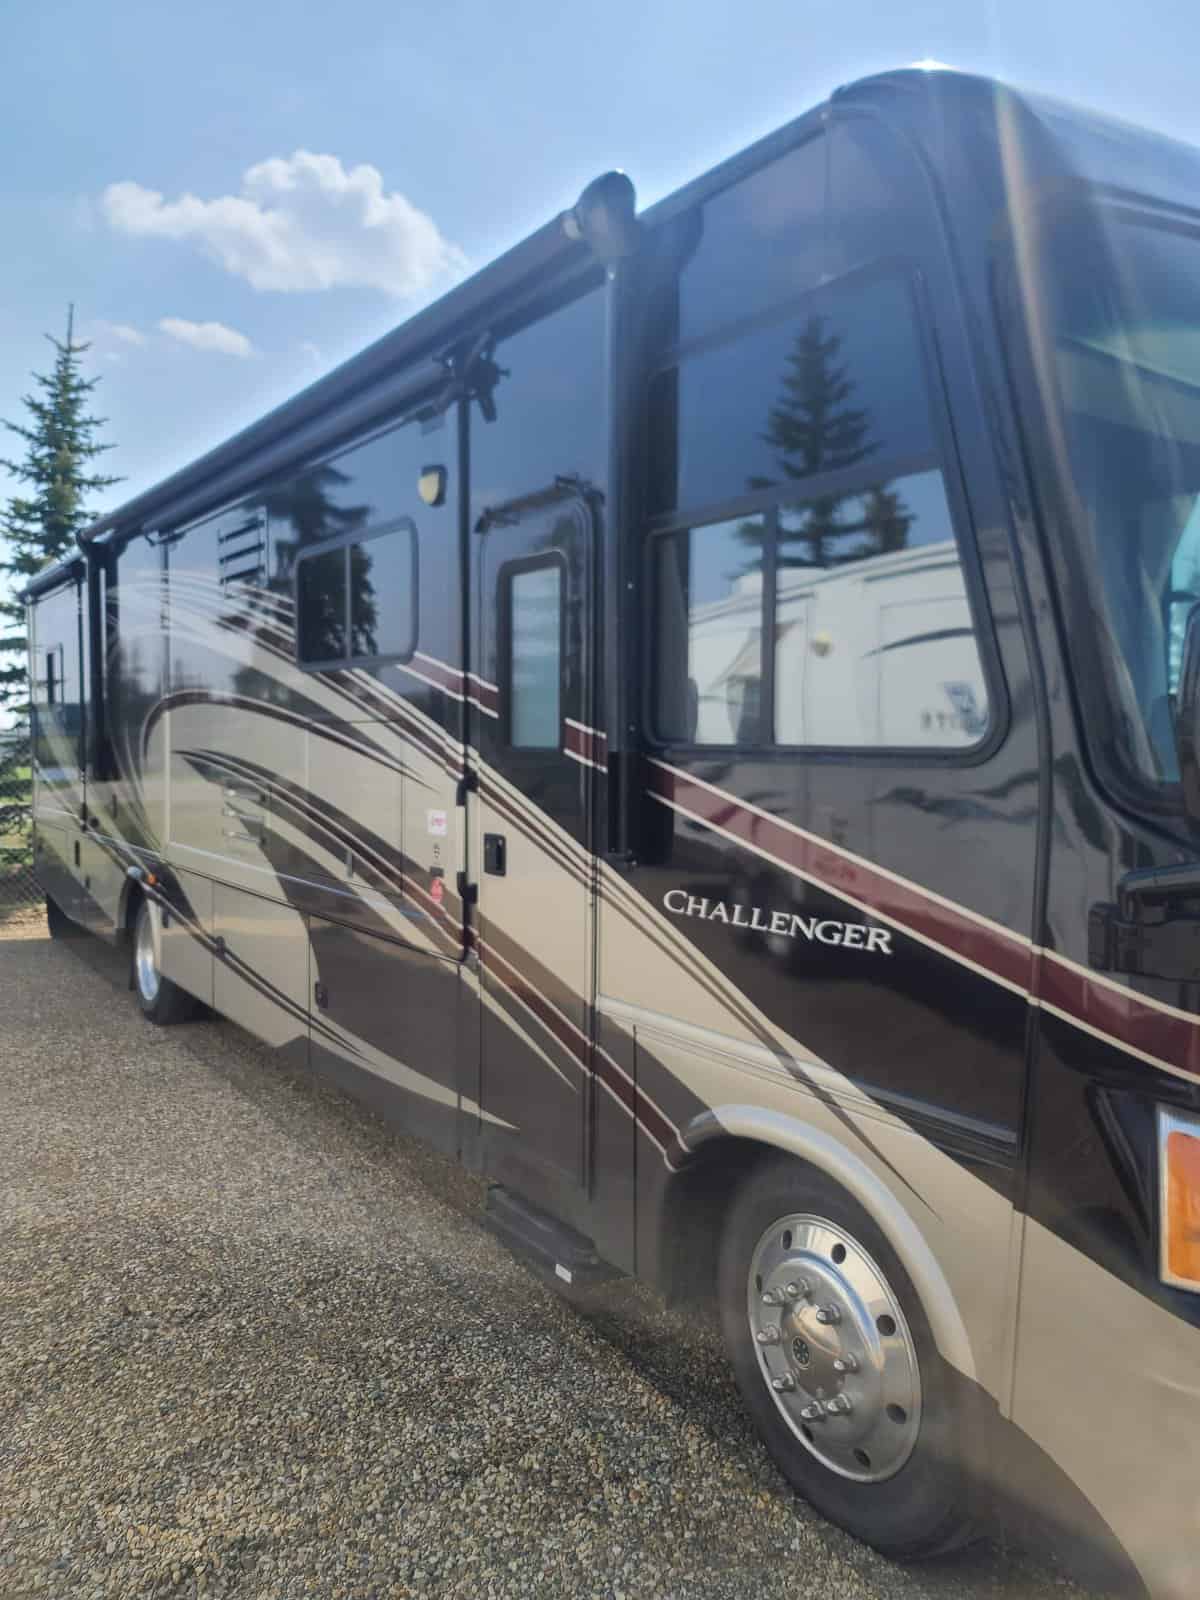 USED 2013 Thor Motor Coach CHALLENGER 37GT